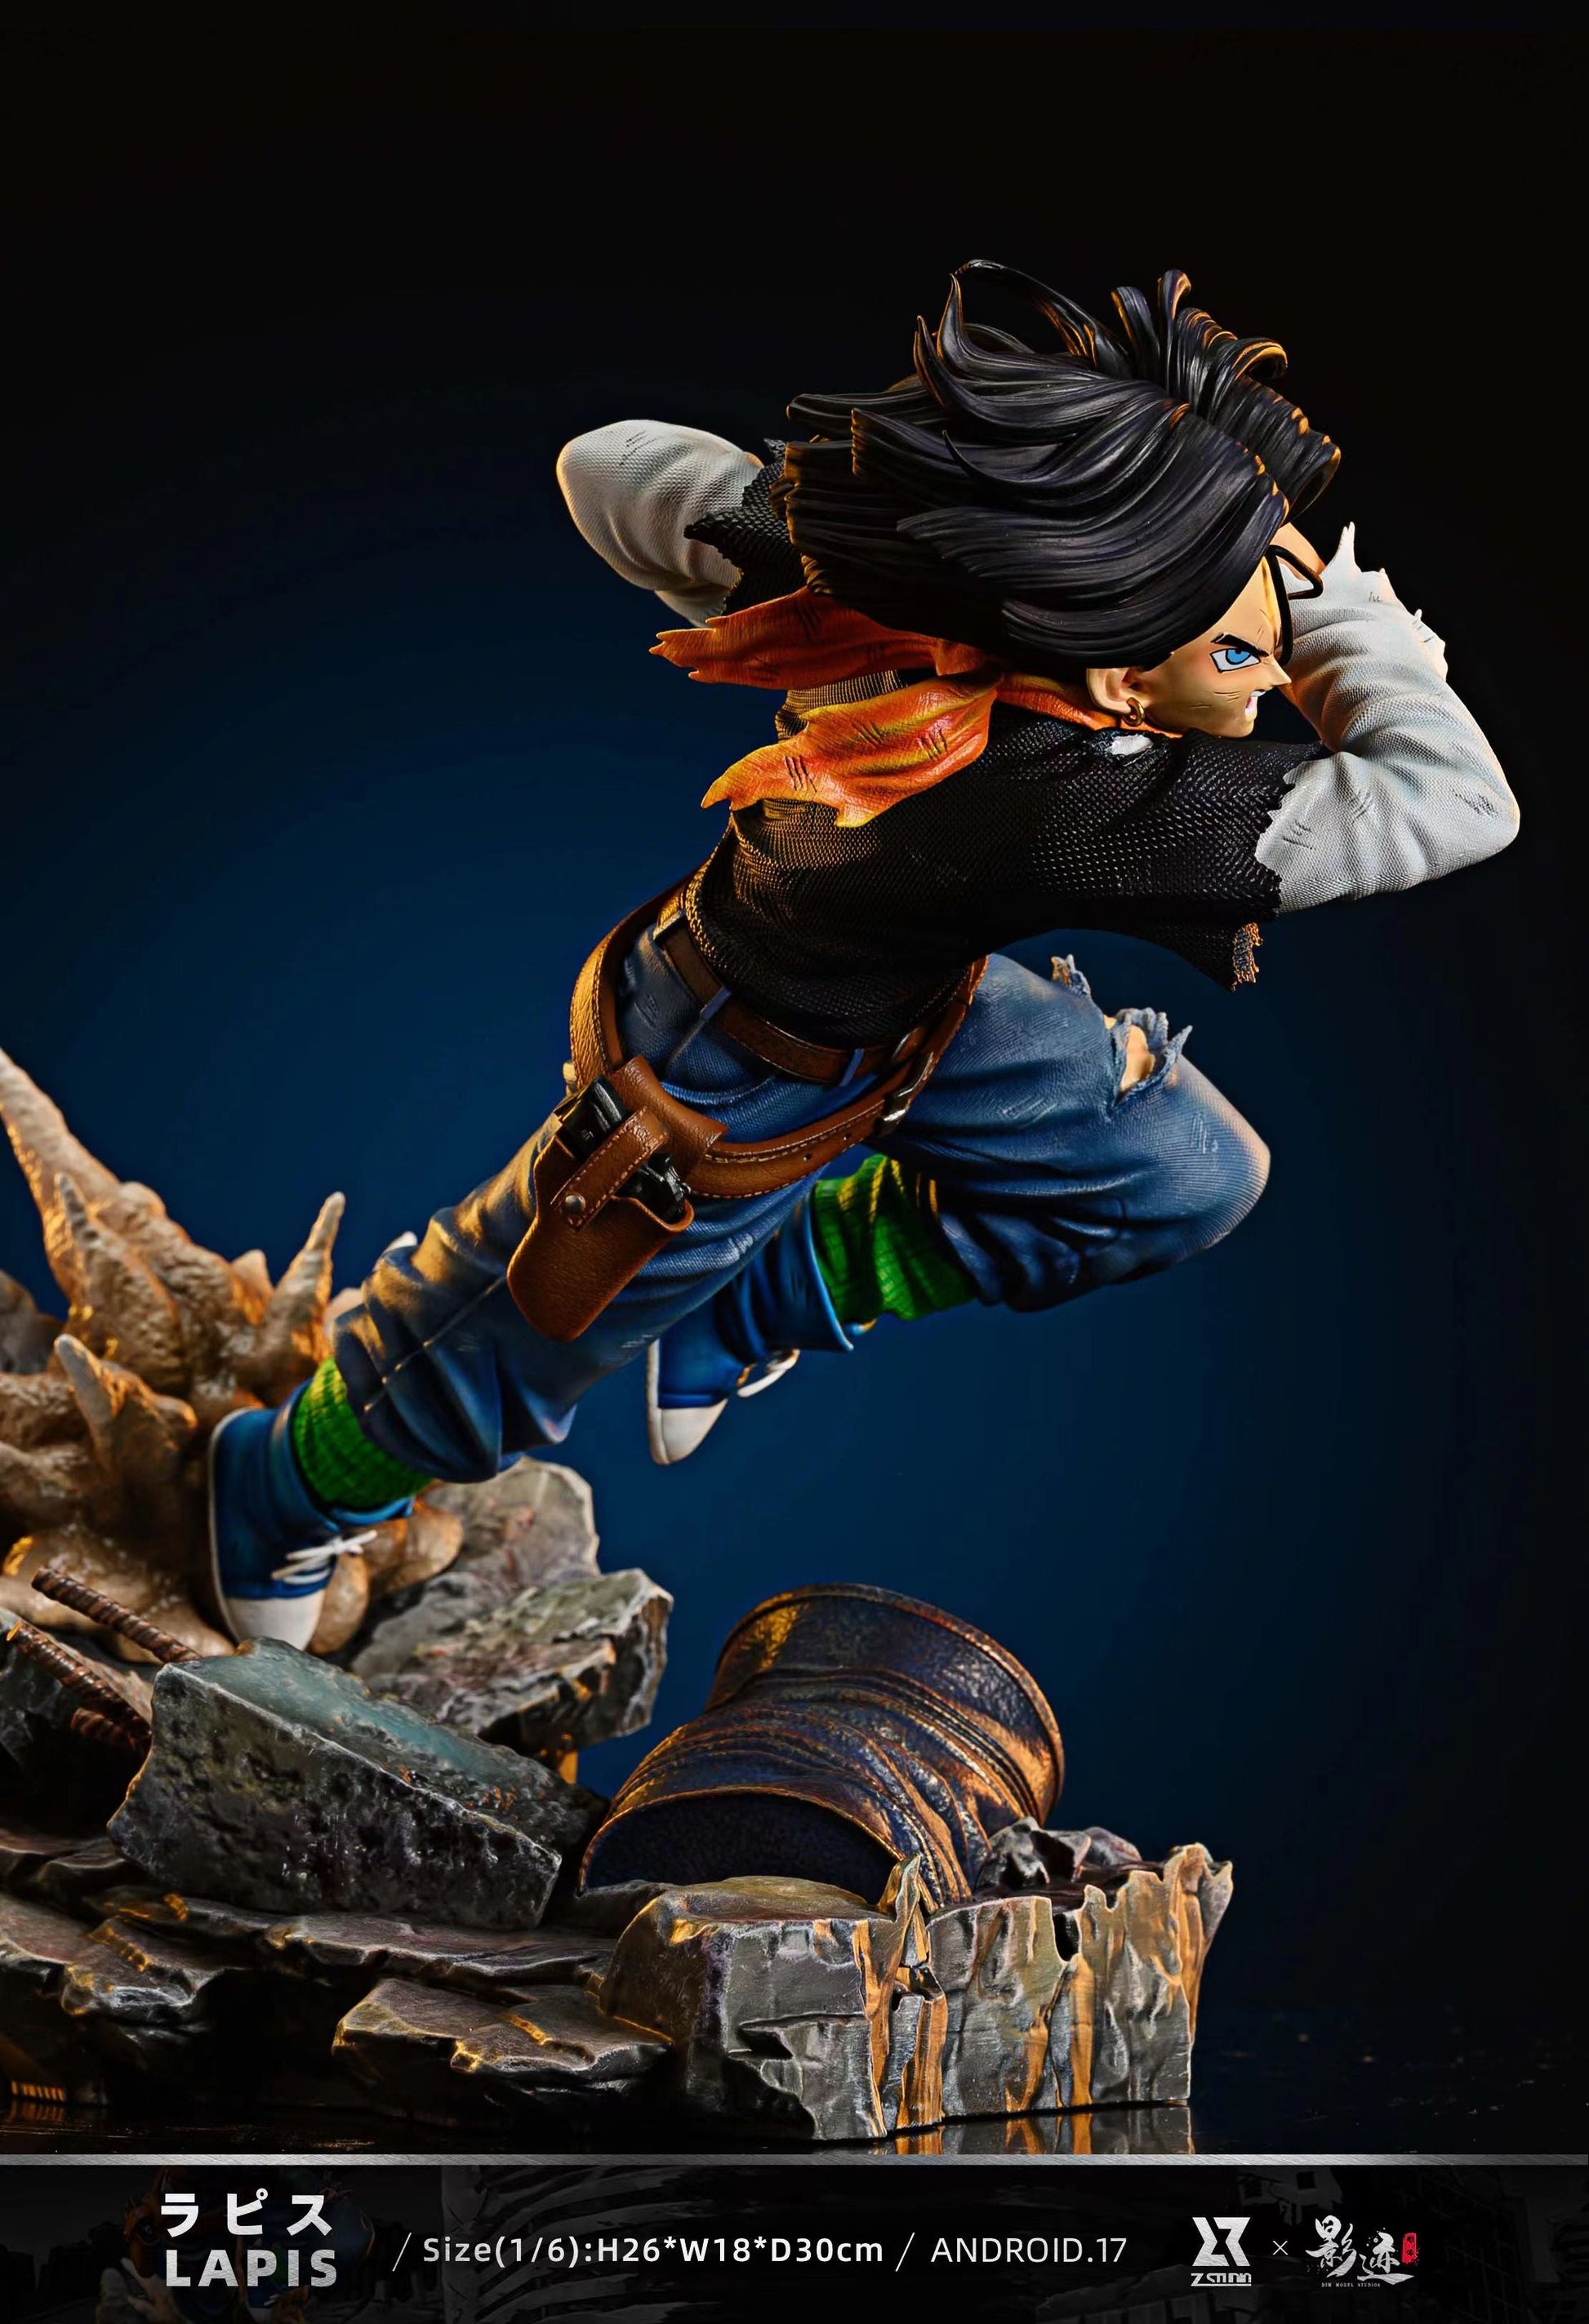 Z x DIM - Android 17 StatueCorp